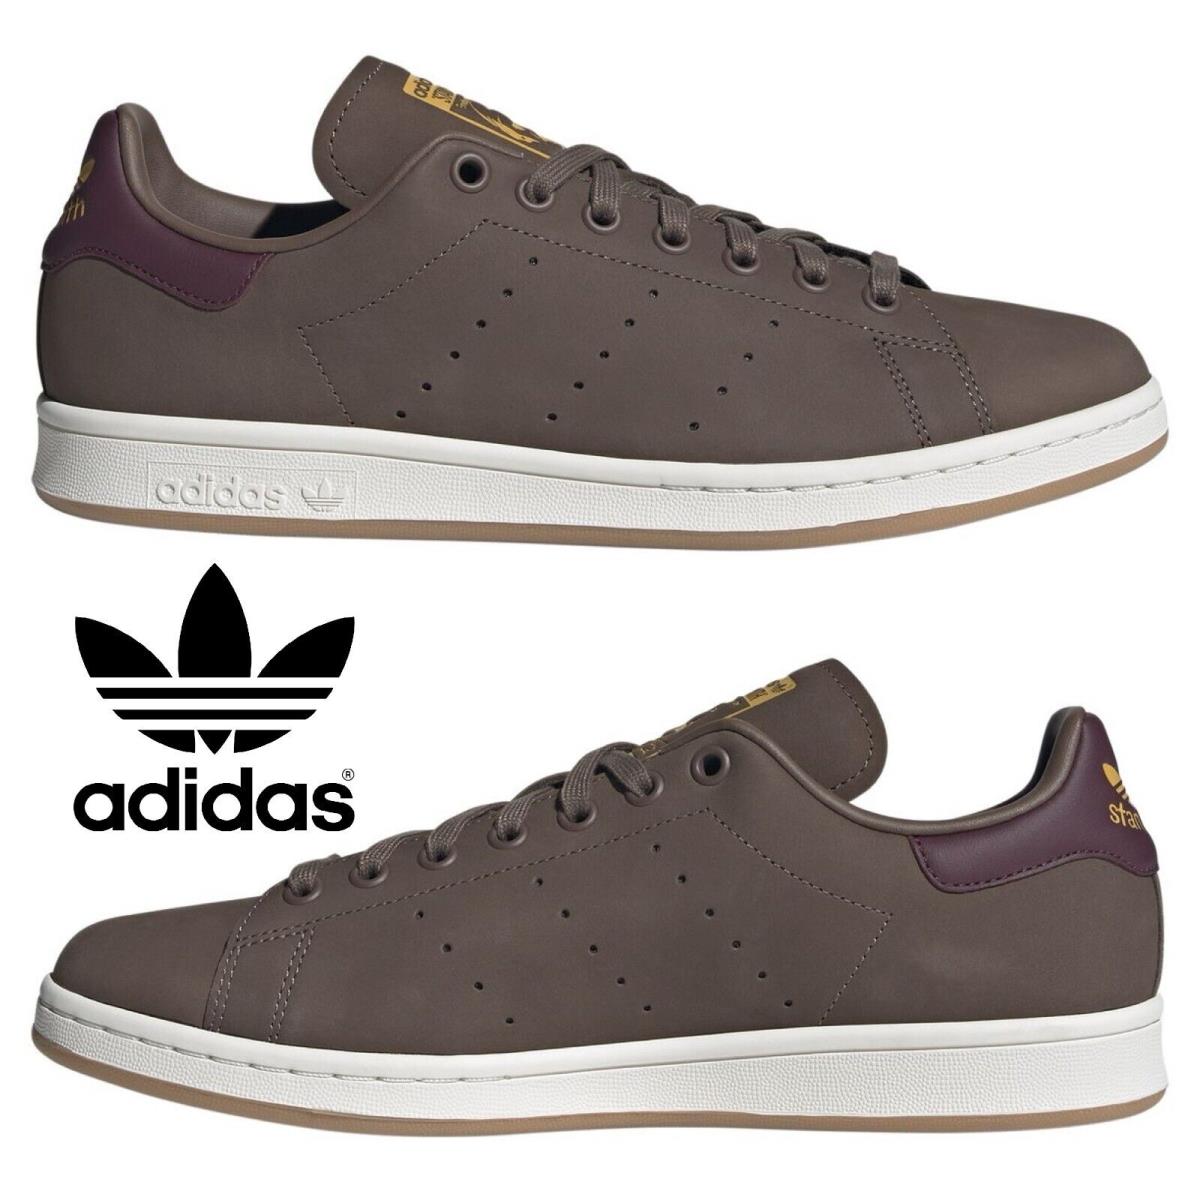 Adidas Originals Stan Smith Men`s Sneakers Comfort Sport Casual Shoes Brown - Brown, Manufacturer: Earth Strata/Maroon/Preloved Yellow